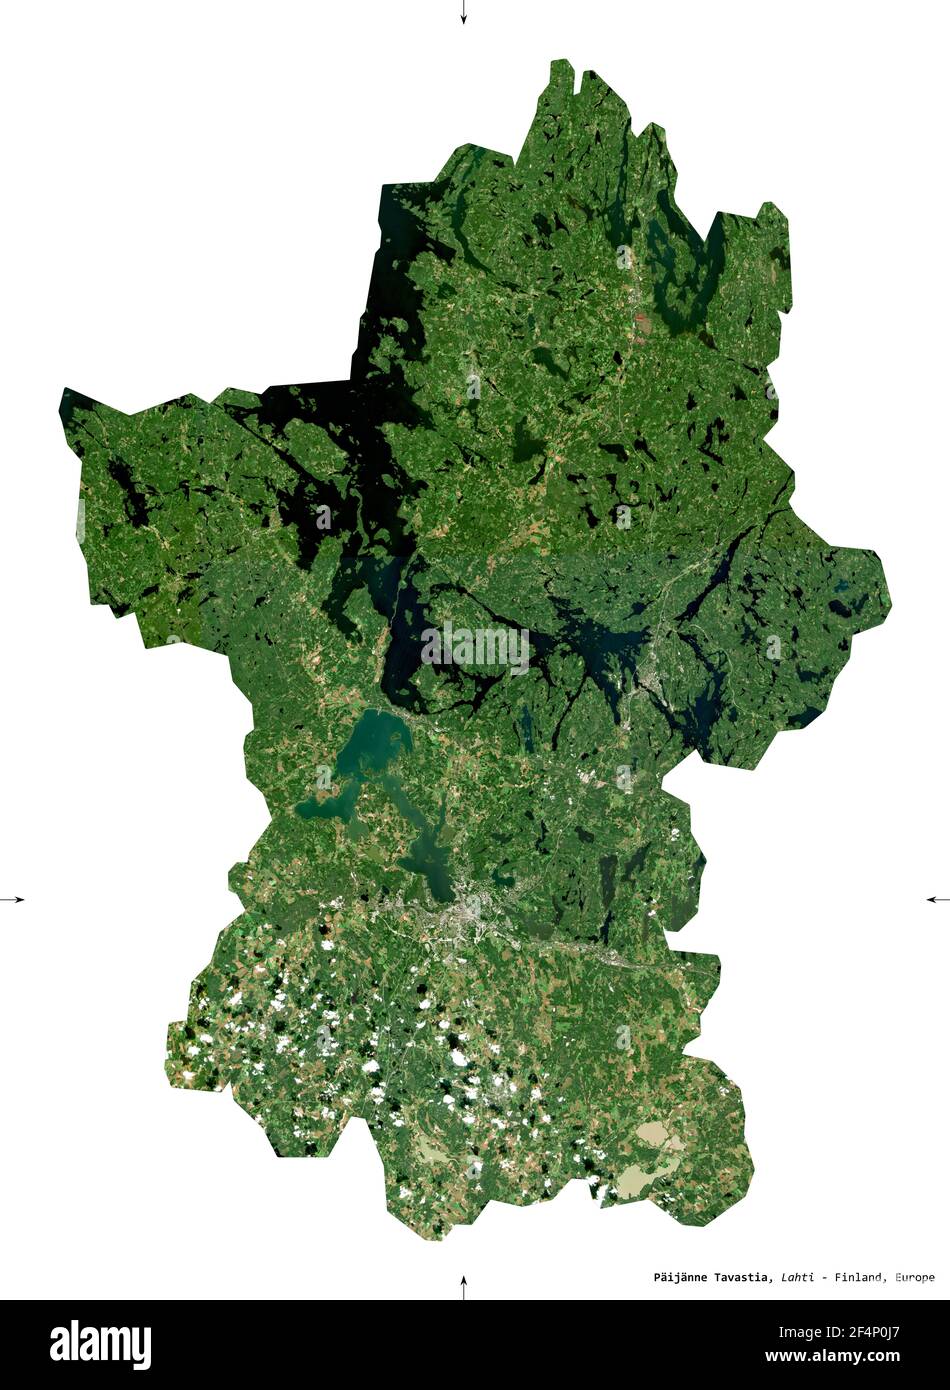 Paijanne Tavastia, region of Finland. Sentinel-2 satellite imagery. Shape isolated on white. Description, location of the capital. Contains modified C Stock Photo